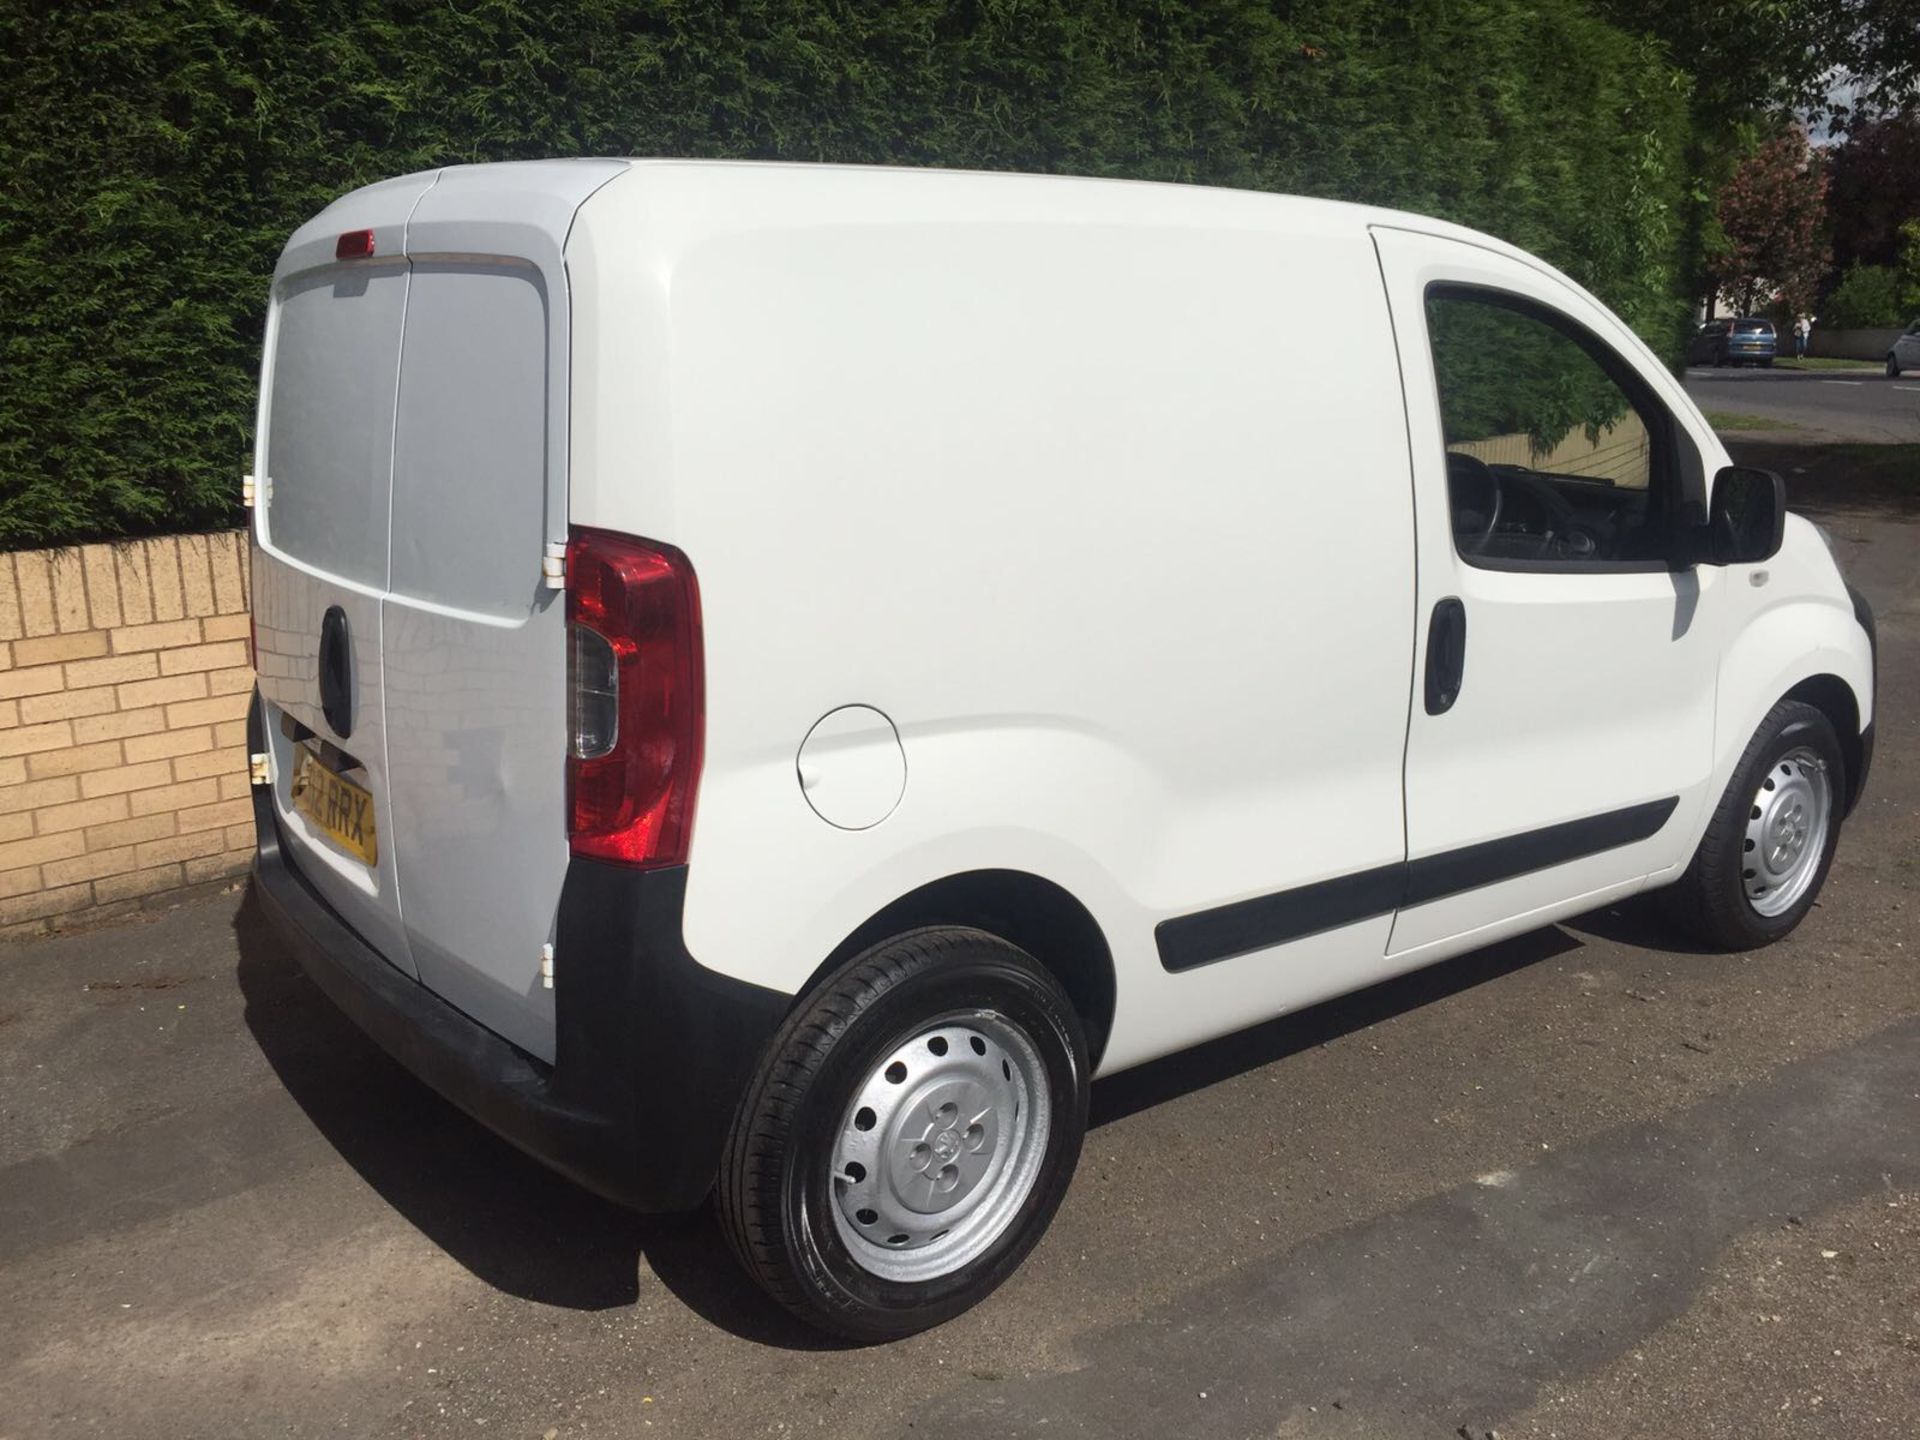 2012/12 REG PEUGEOT BIPPER S HDI, FULL SERVICE HISTORY, SHOWING 1 OWNER - Image 4 of 6